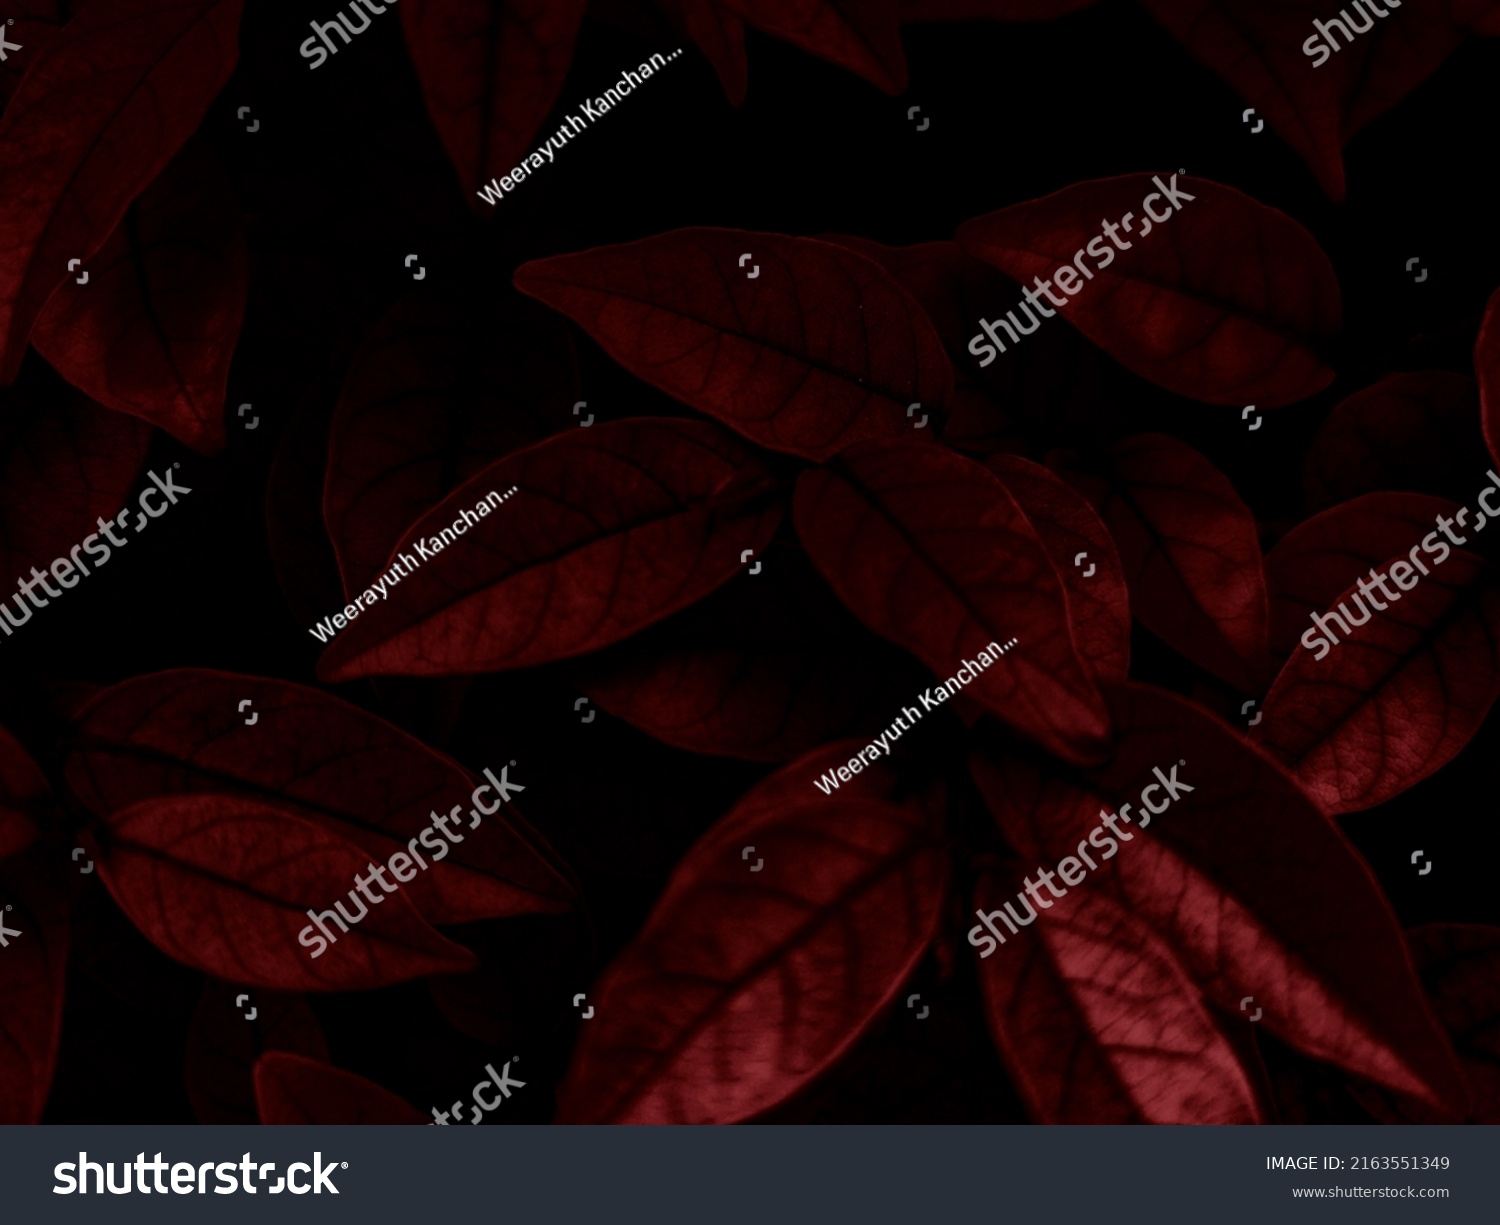 Beautiful abstract color black and red flowers on black background, light pink flower frame, pink leaves texture, dark background, valentines day, love theme, red texture  #2163551349